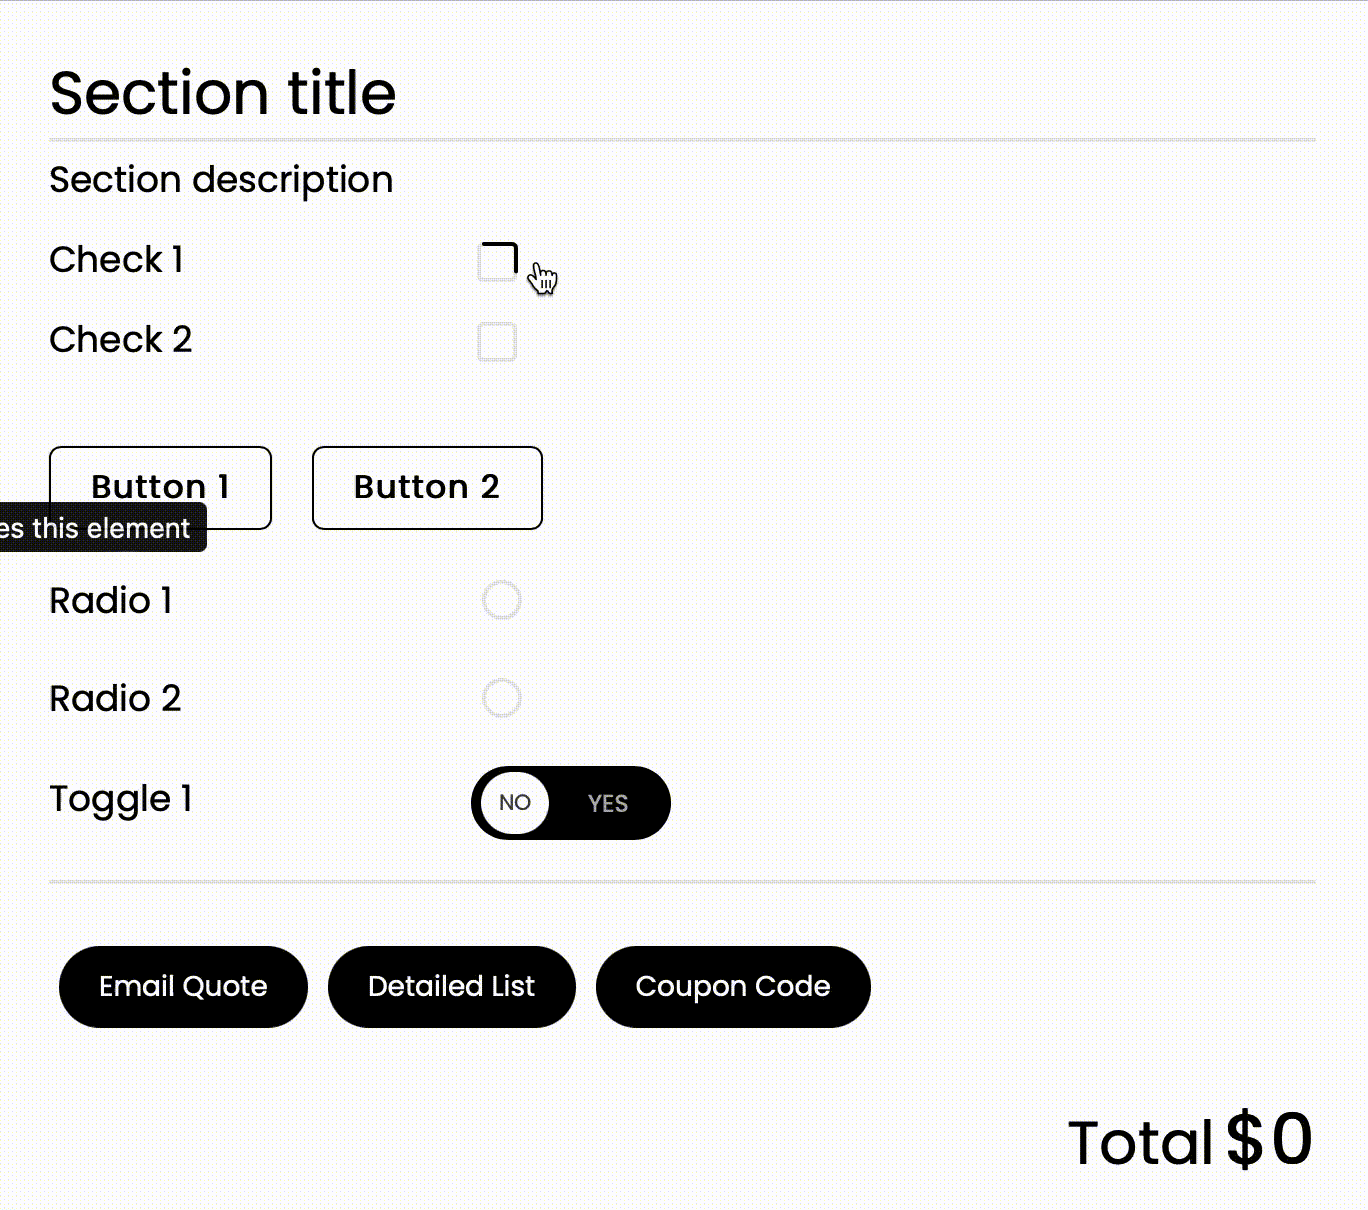 Checkbox, Toggle Switches & Simple Buttons - Stylish Cost Calculator